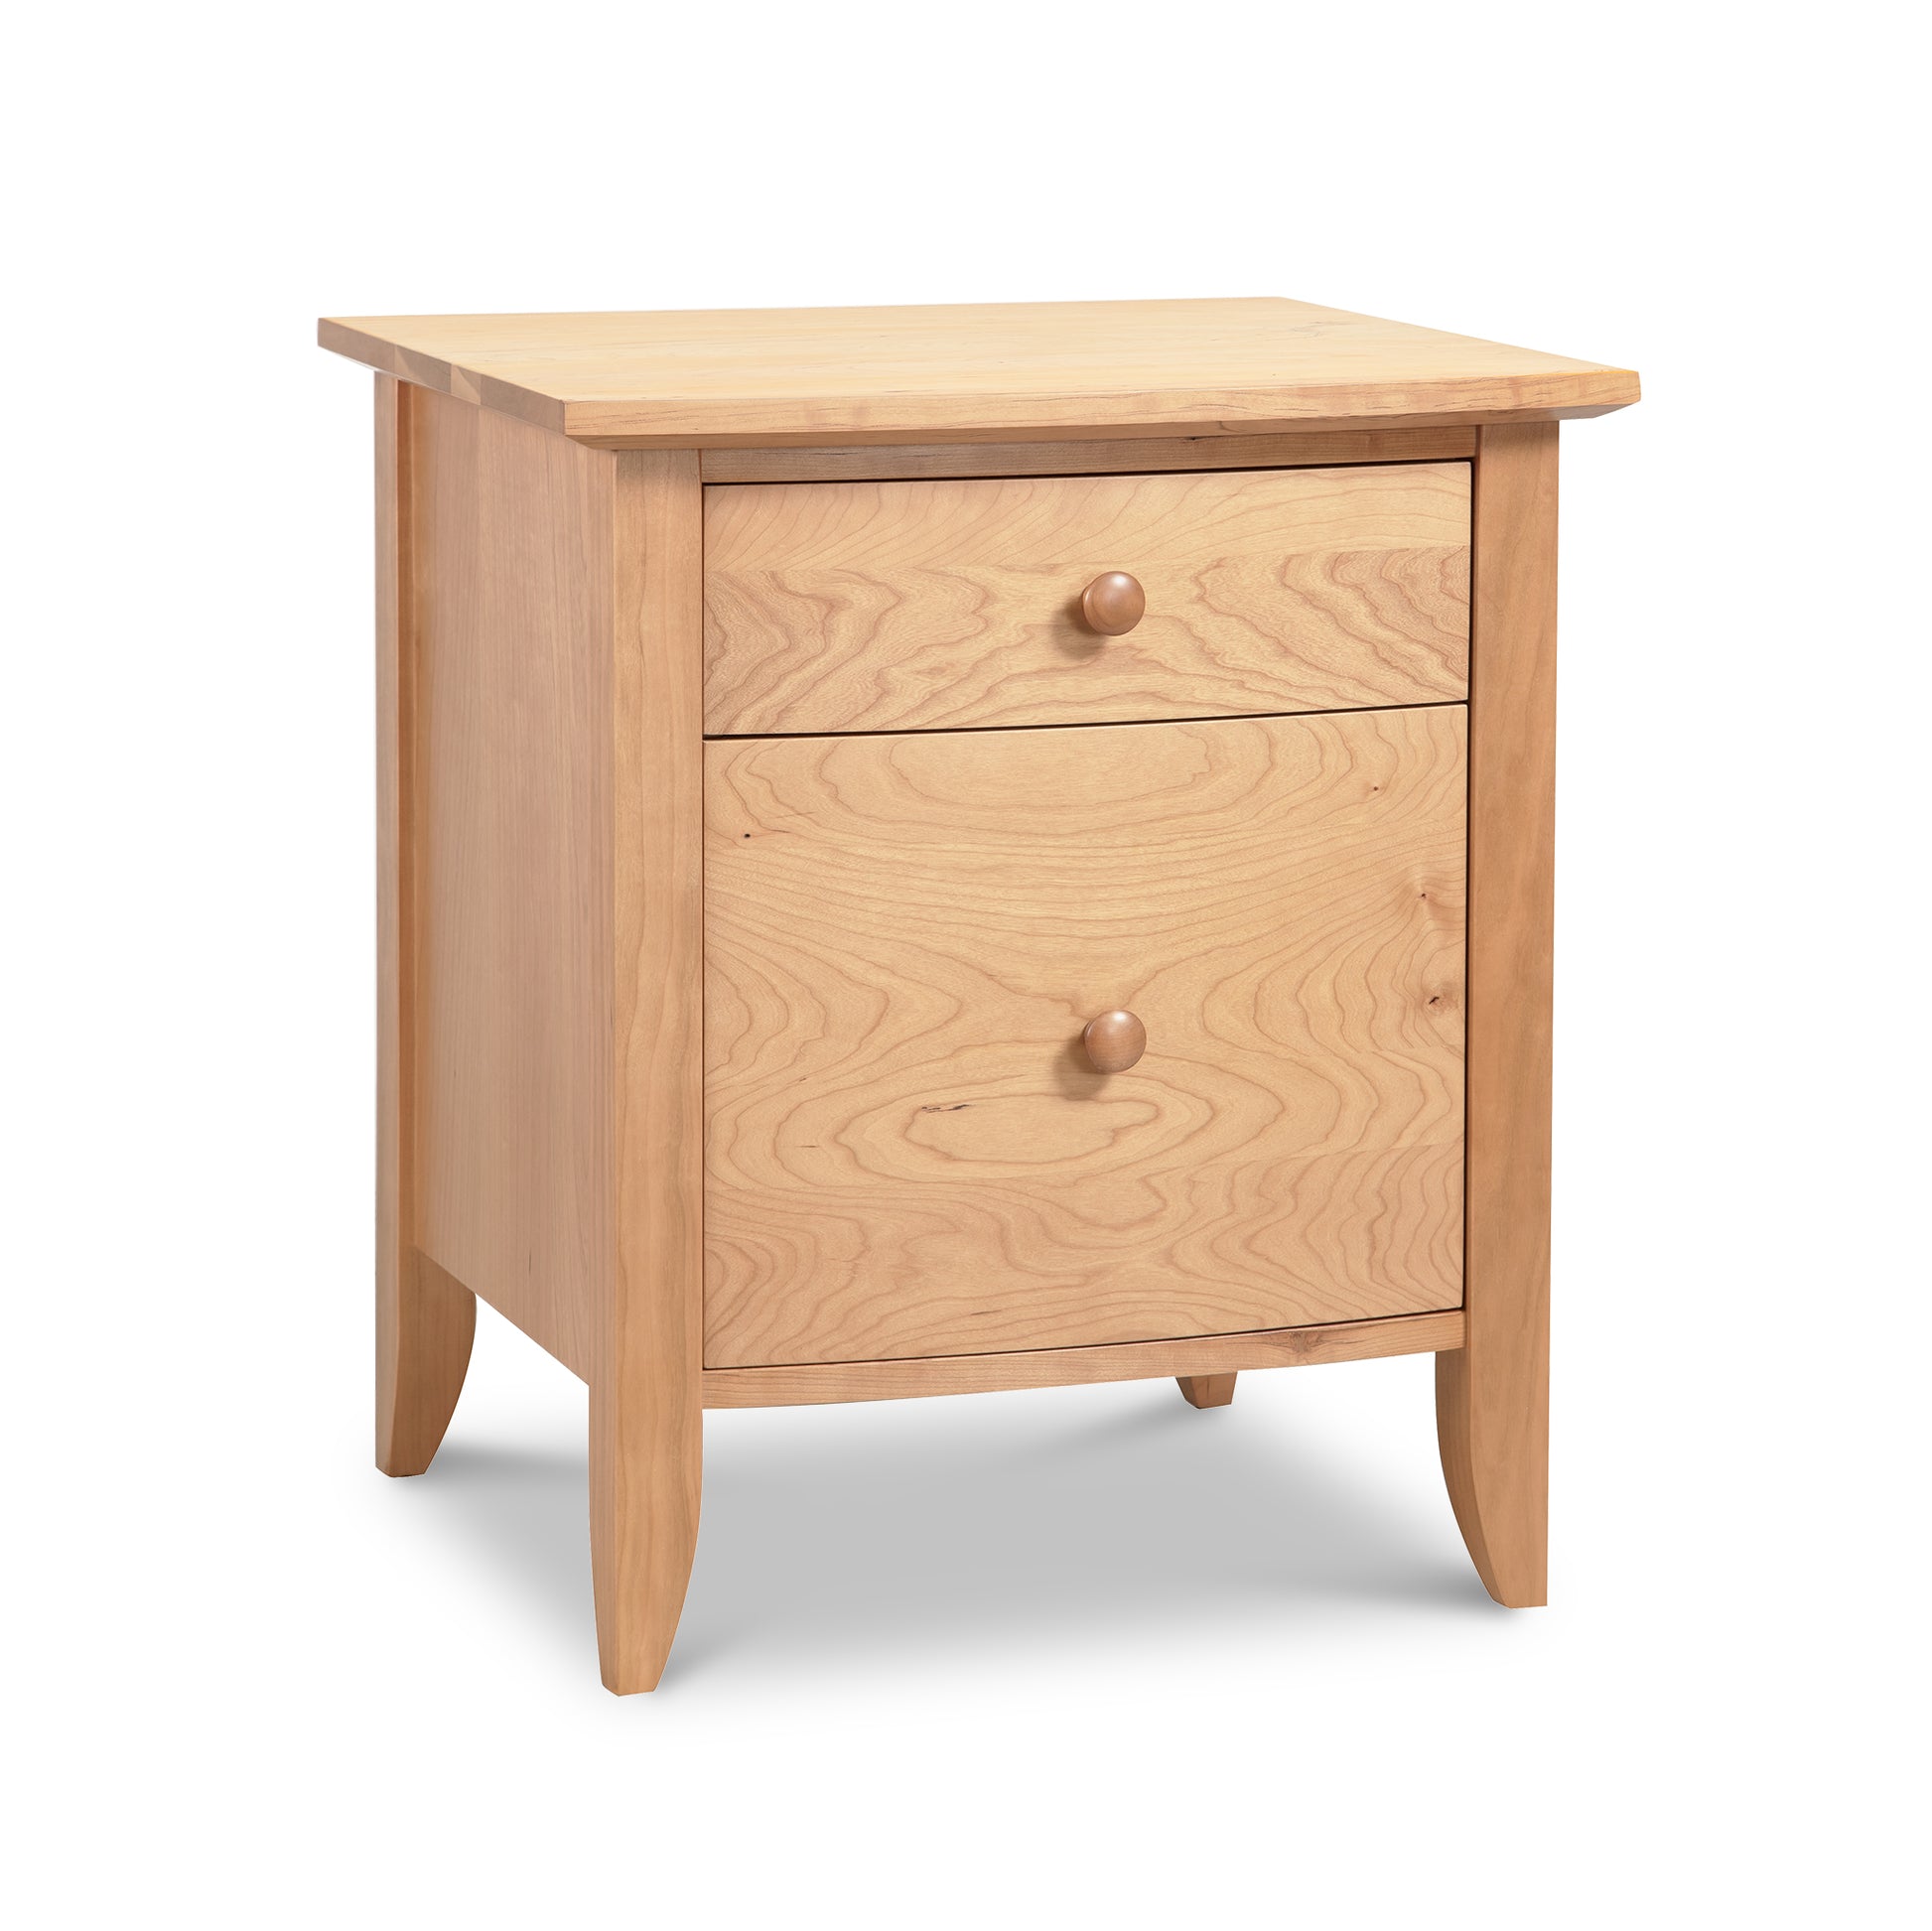 This Bow Front 1-Drawer Nightstand with Door from Lyndon Furniture features a classic design with two spacious drawers. Crafted from solid wood, it adds rustic charm to any bedroom setting.